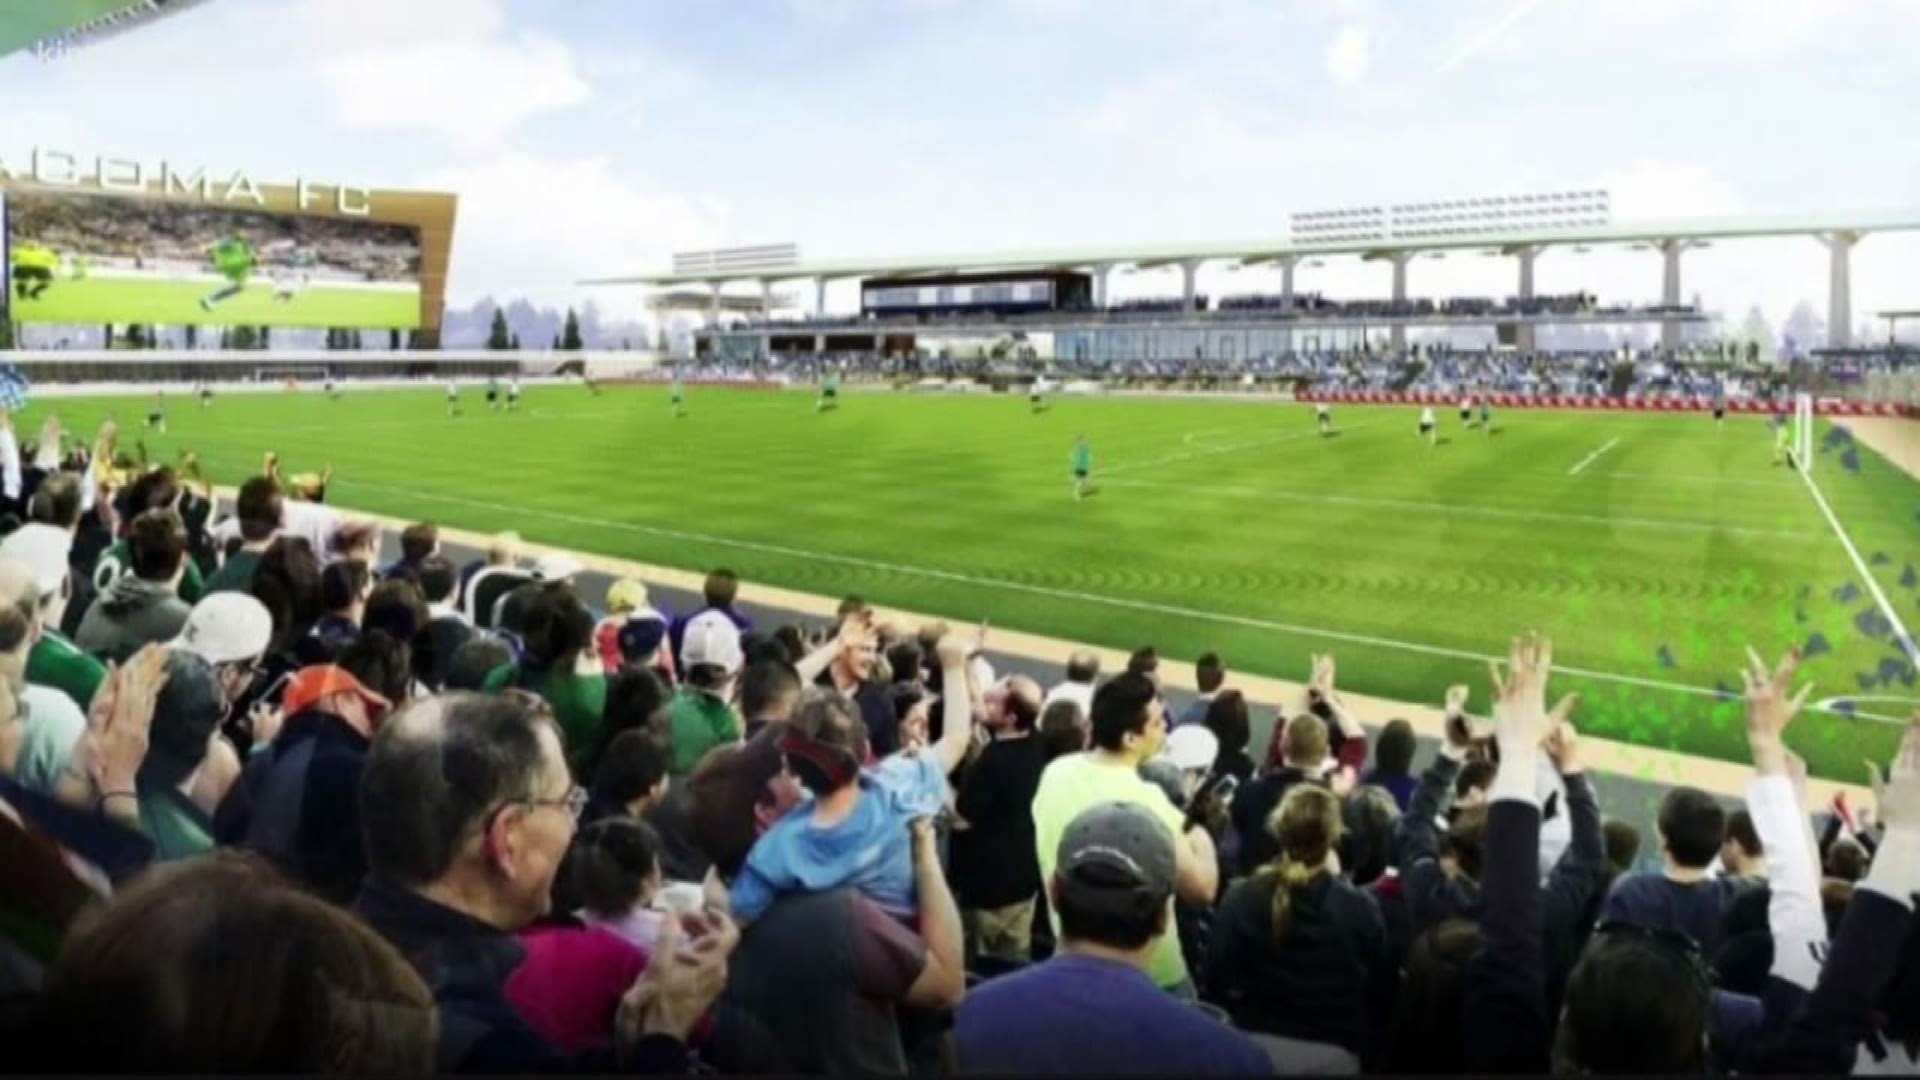 Big news out of Tacoma that could lead to a new soccer-specific stadium in central Tacoma. KING 5's Chris Daniels has the story from Cheney.